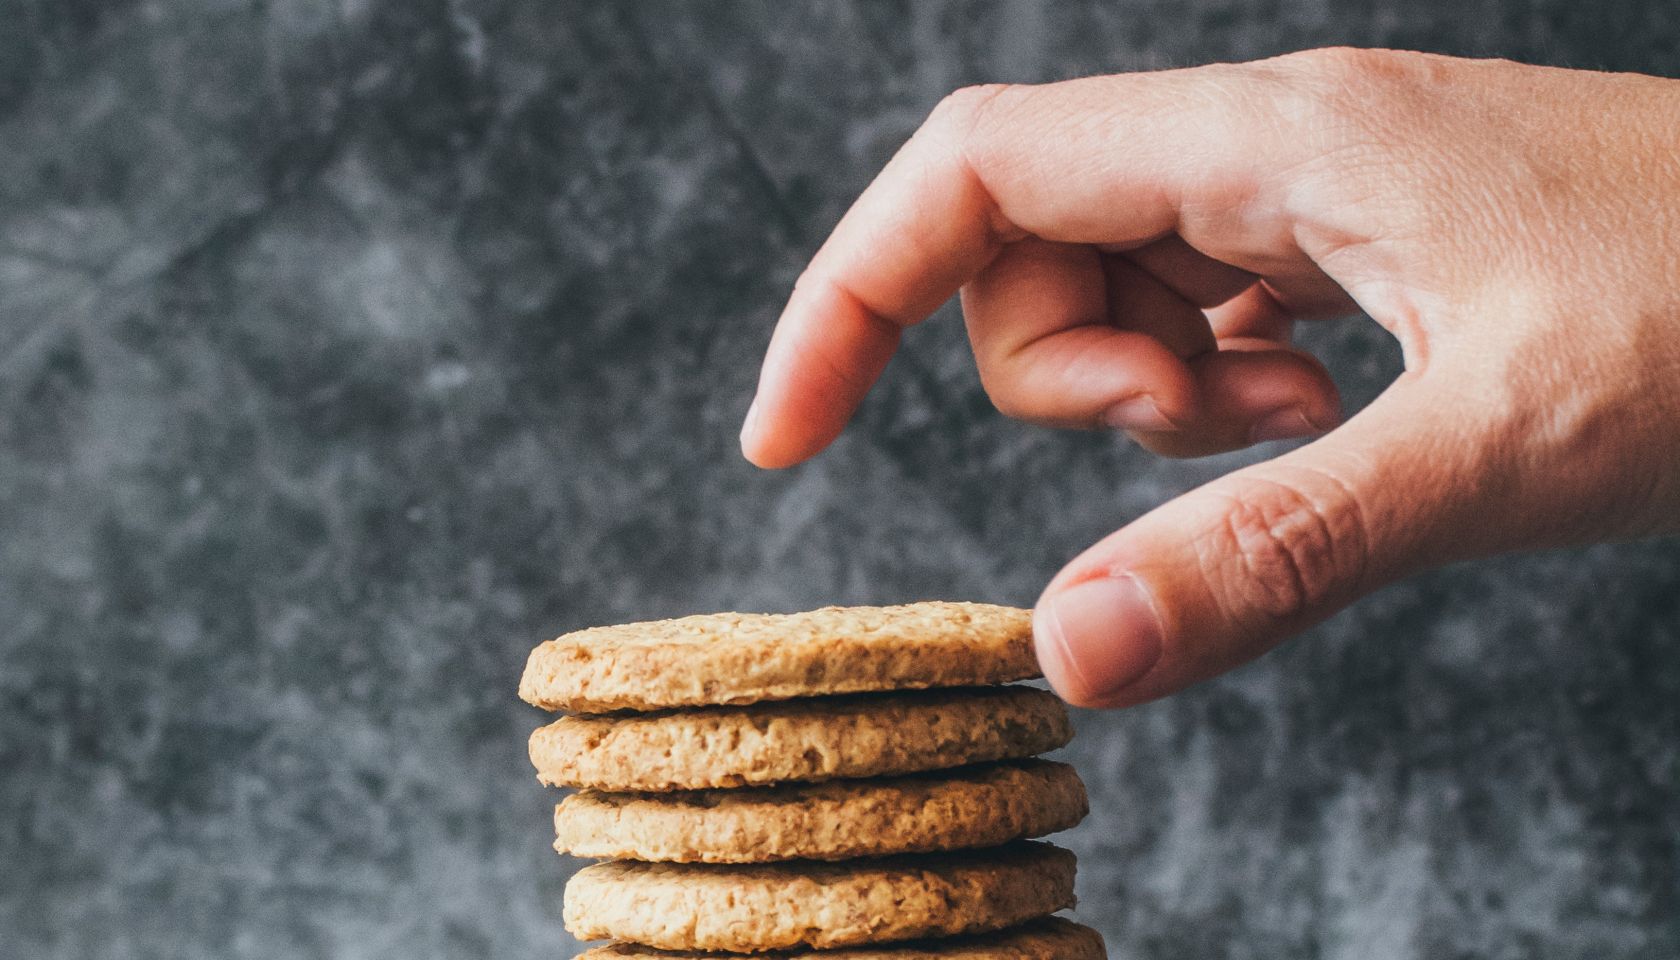 Person's hand reaching for a stack of cookies